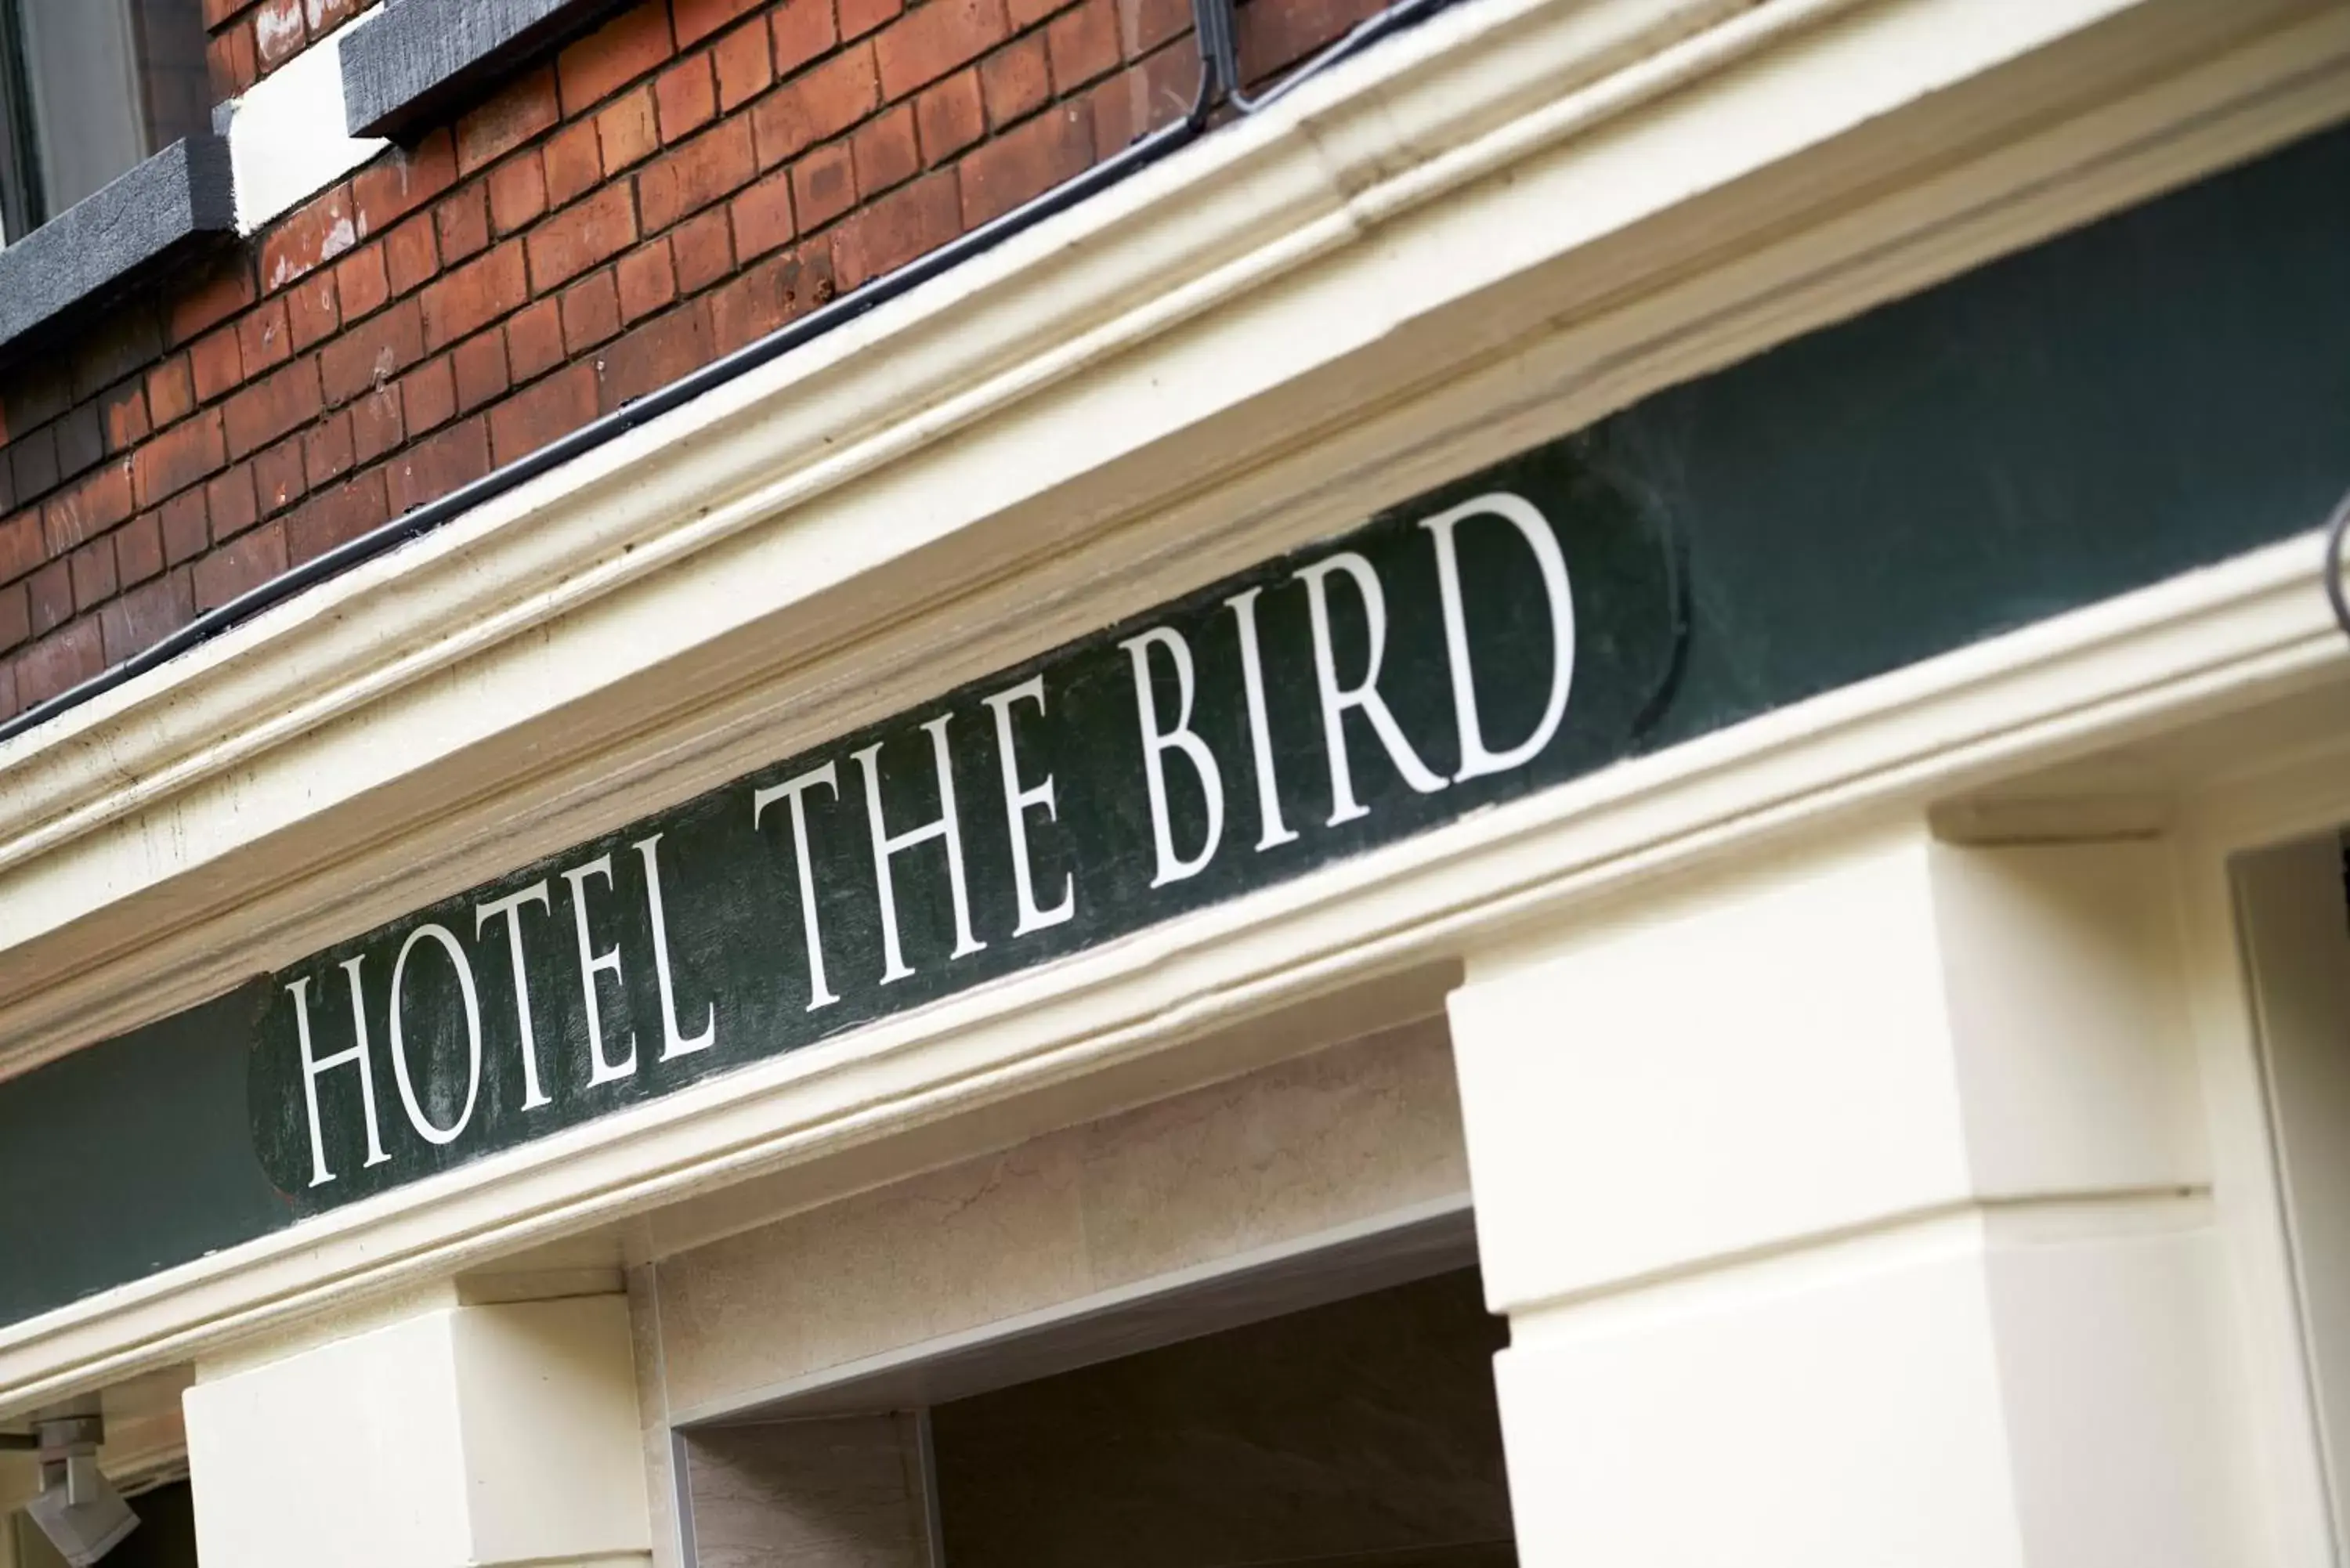 Property logo or sign, Logo/Certificate/Sign/Award in Hotel The Bird